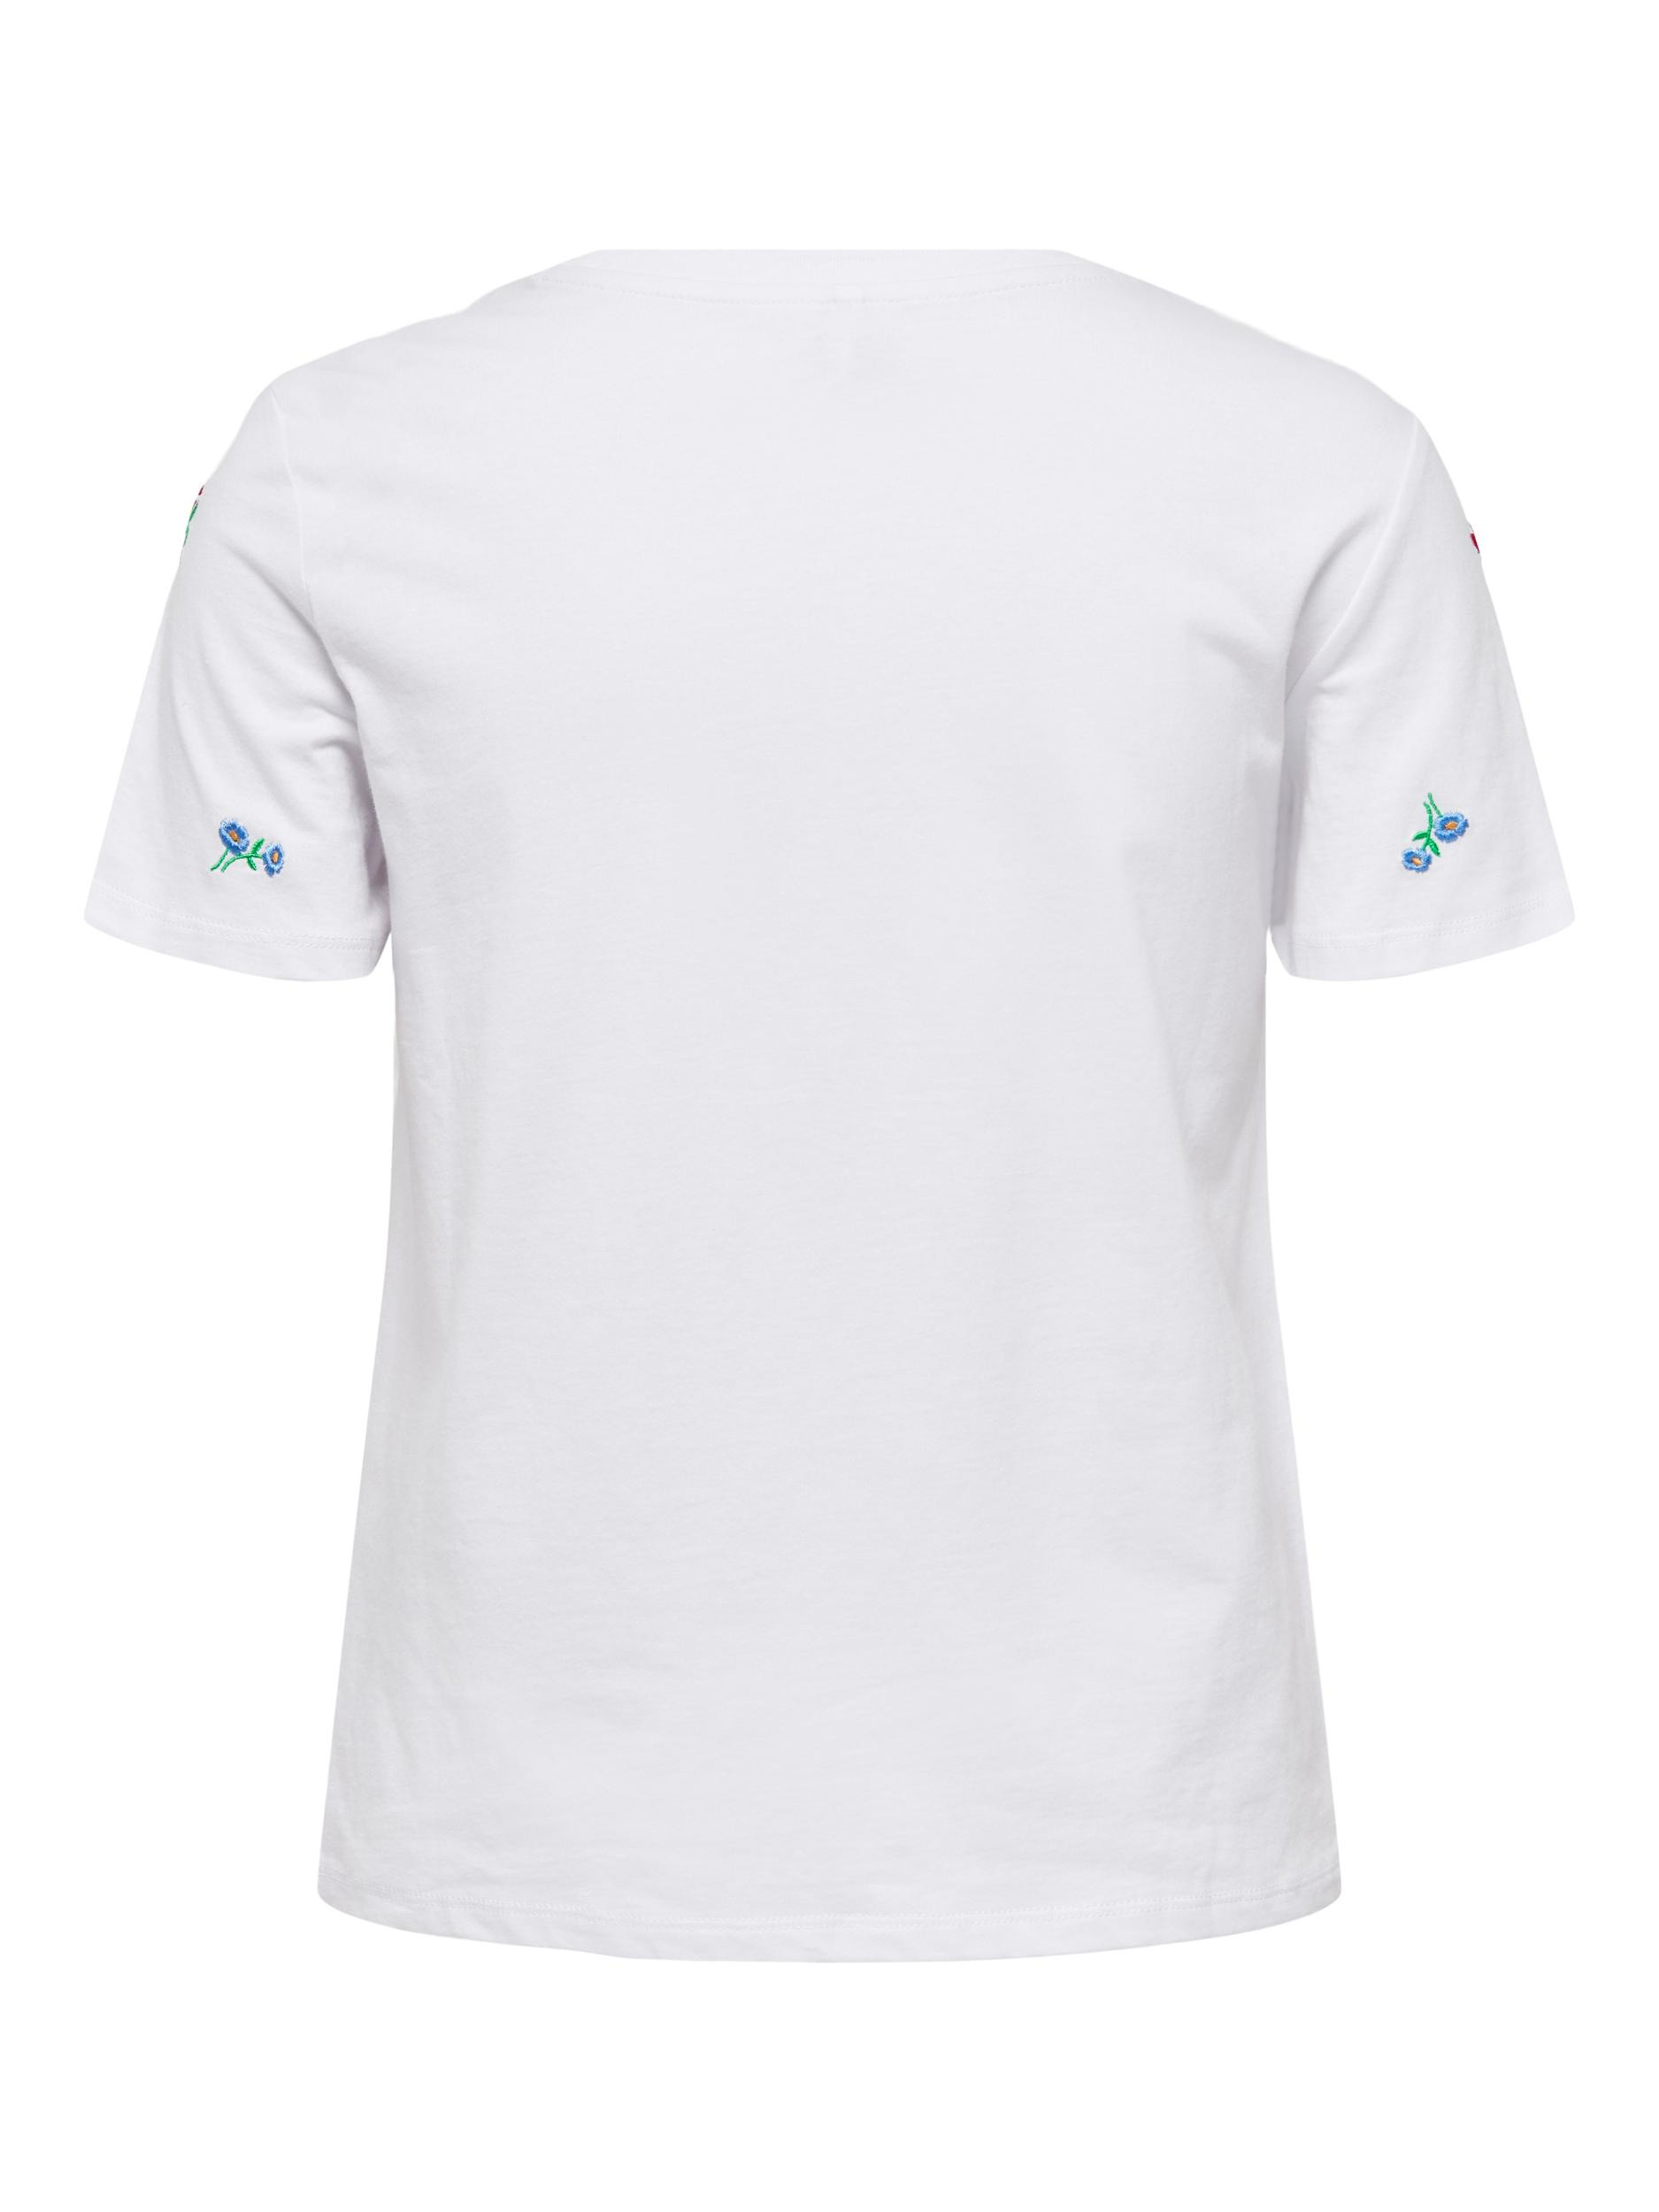 Only - T-shirt regular fit con stampa, Bianco 1, large image number 1